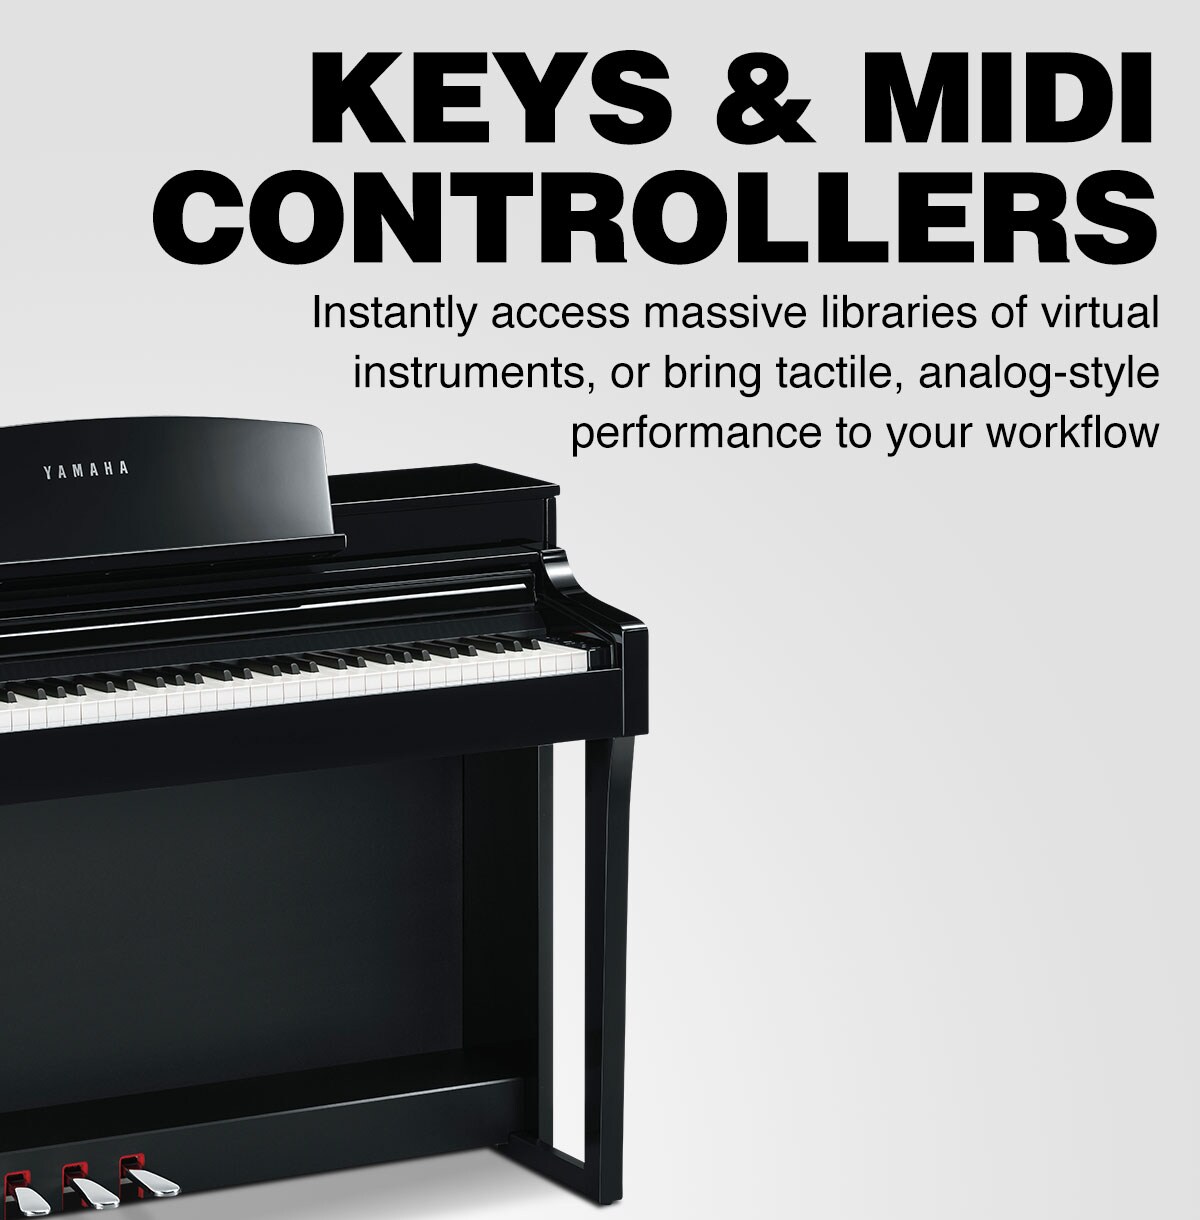 Keys & MIDI. Instantly accass massive libraries of virtual insturments or bring tactile, analog-style performance to your workflow.